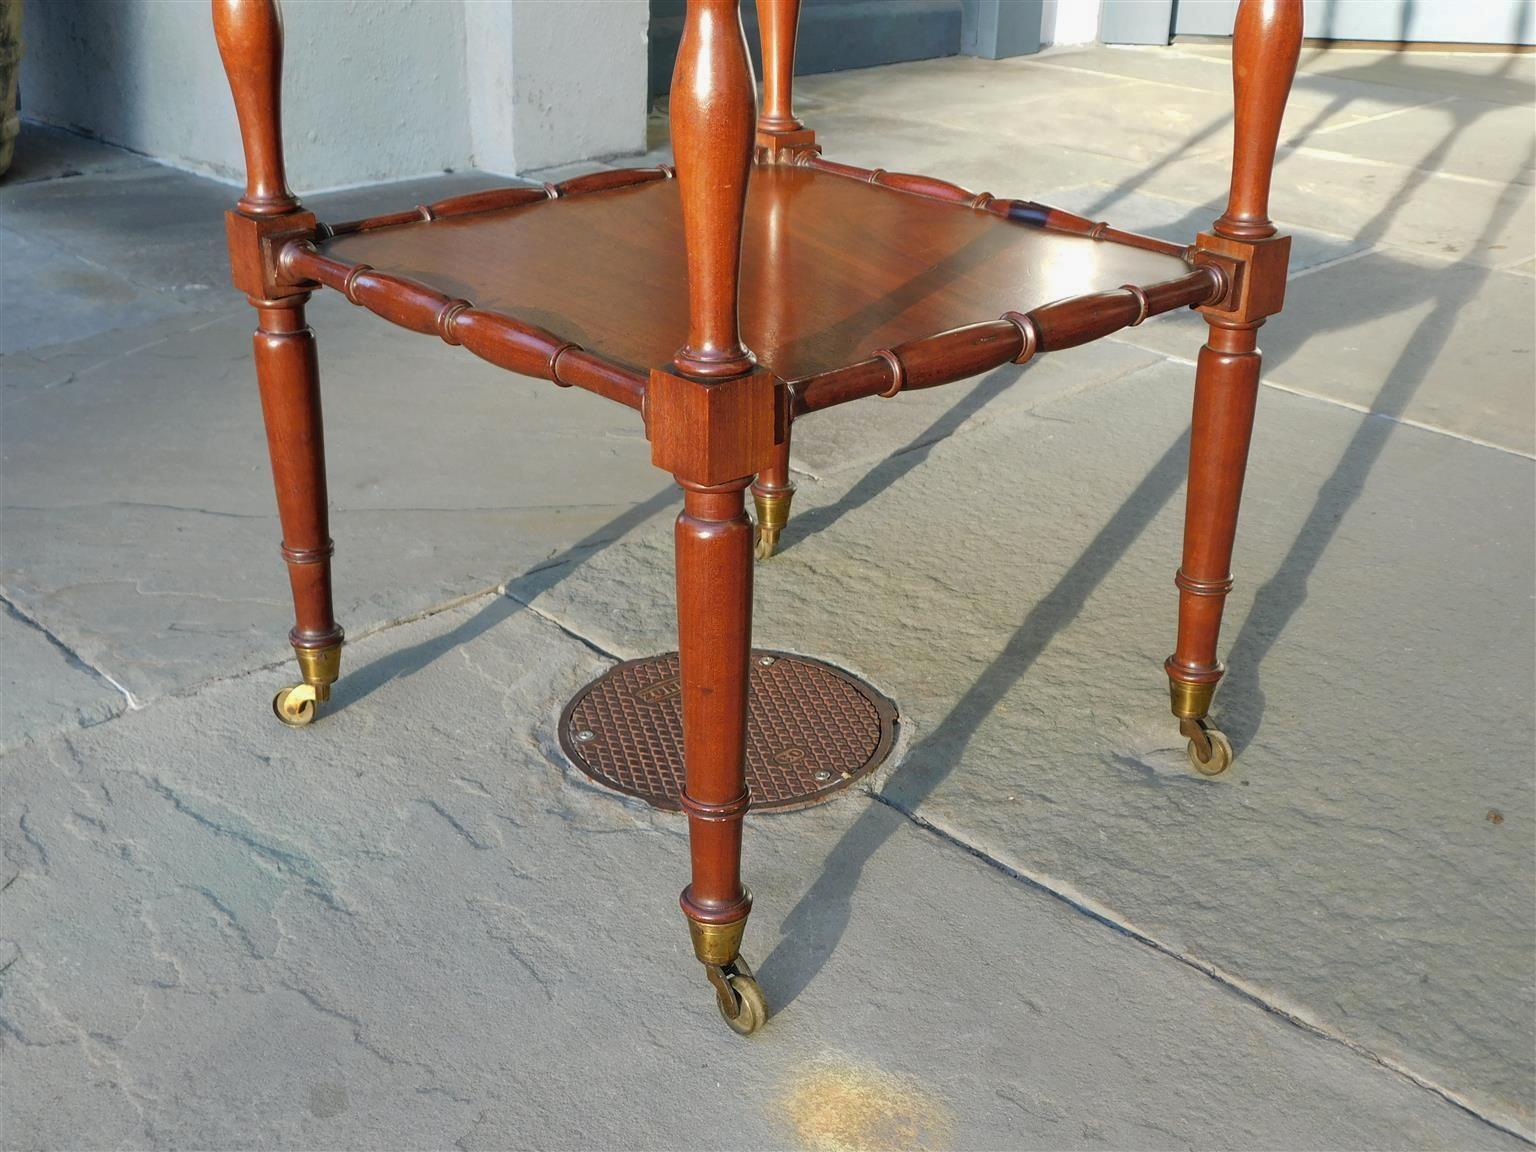 English Regency Mahogany Four Tiered Finial Etagere with Brass Casters, C. 1800 For Sale 3